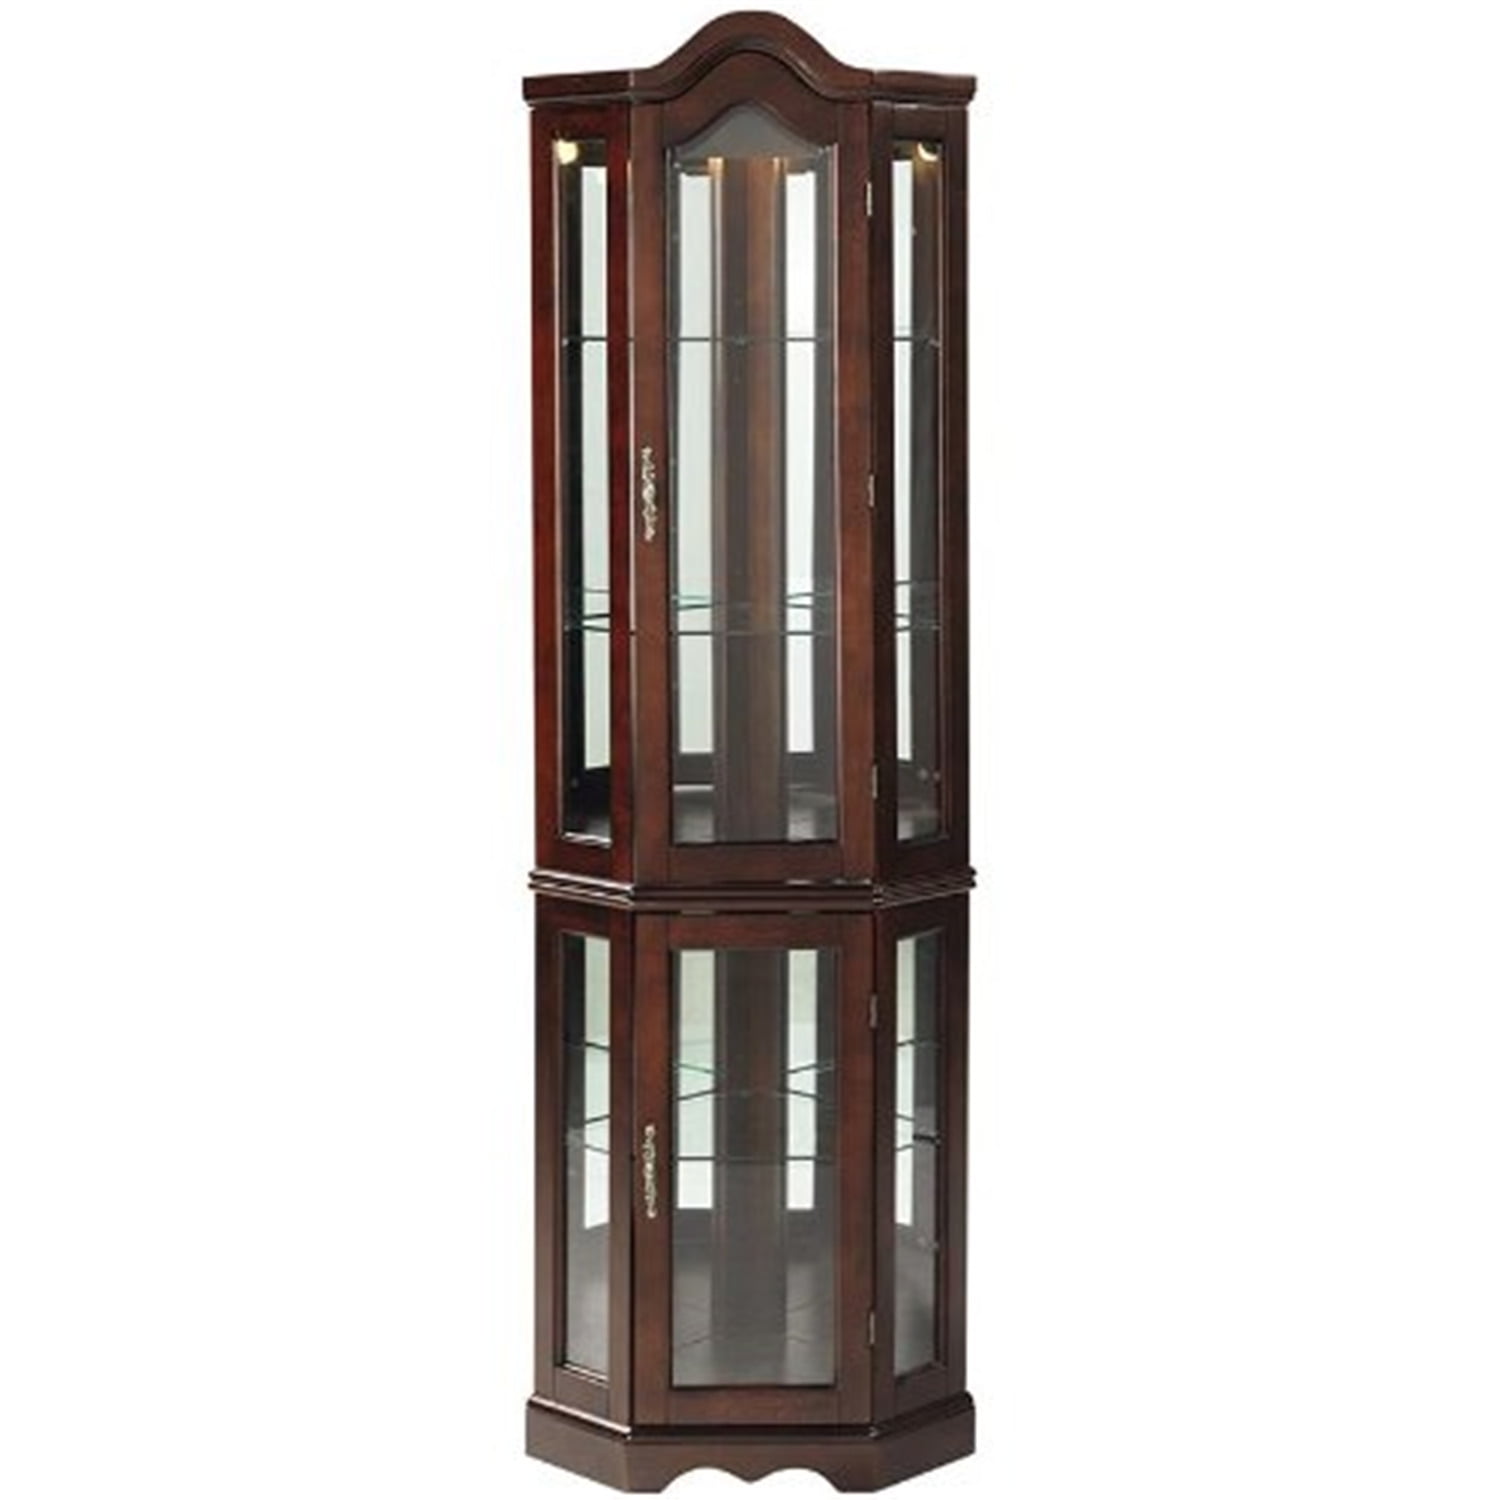 Lighted Corner Curio Cabinet Mahogany, Lighted Curio Cabinet With Glass Doors